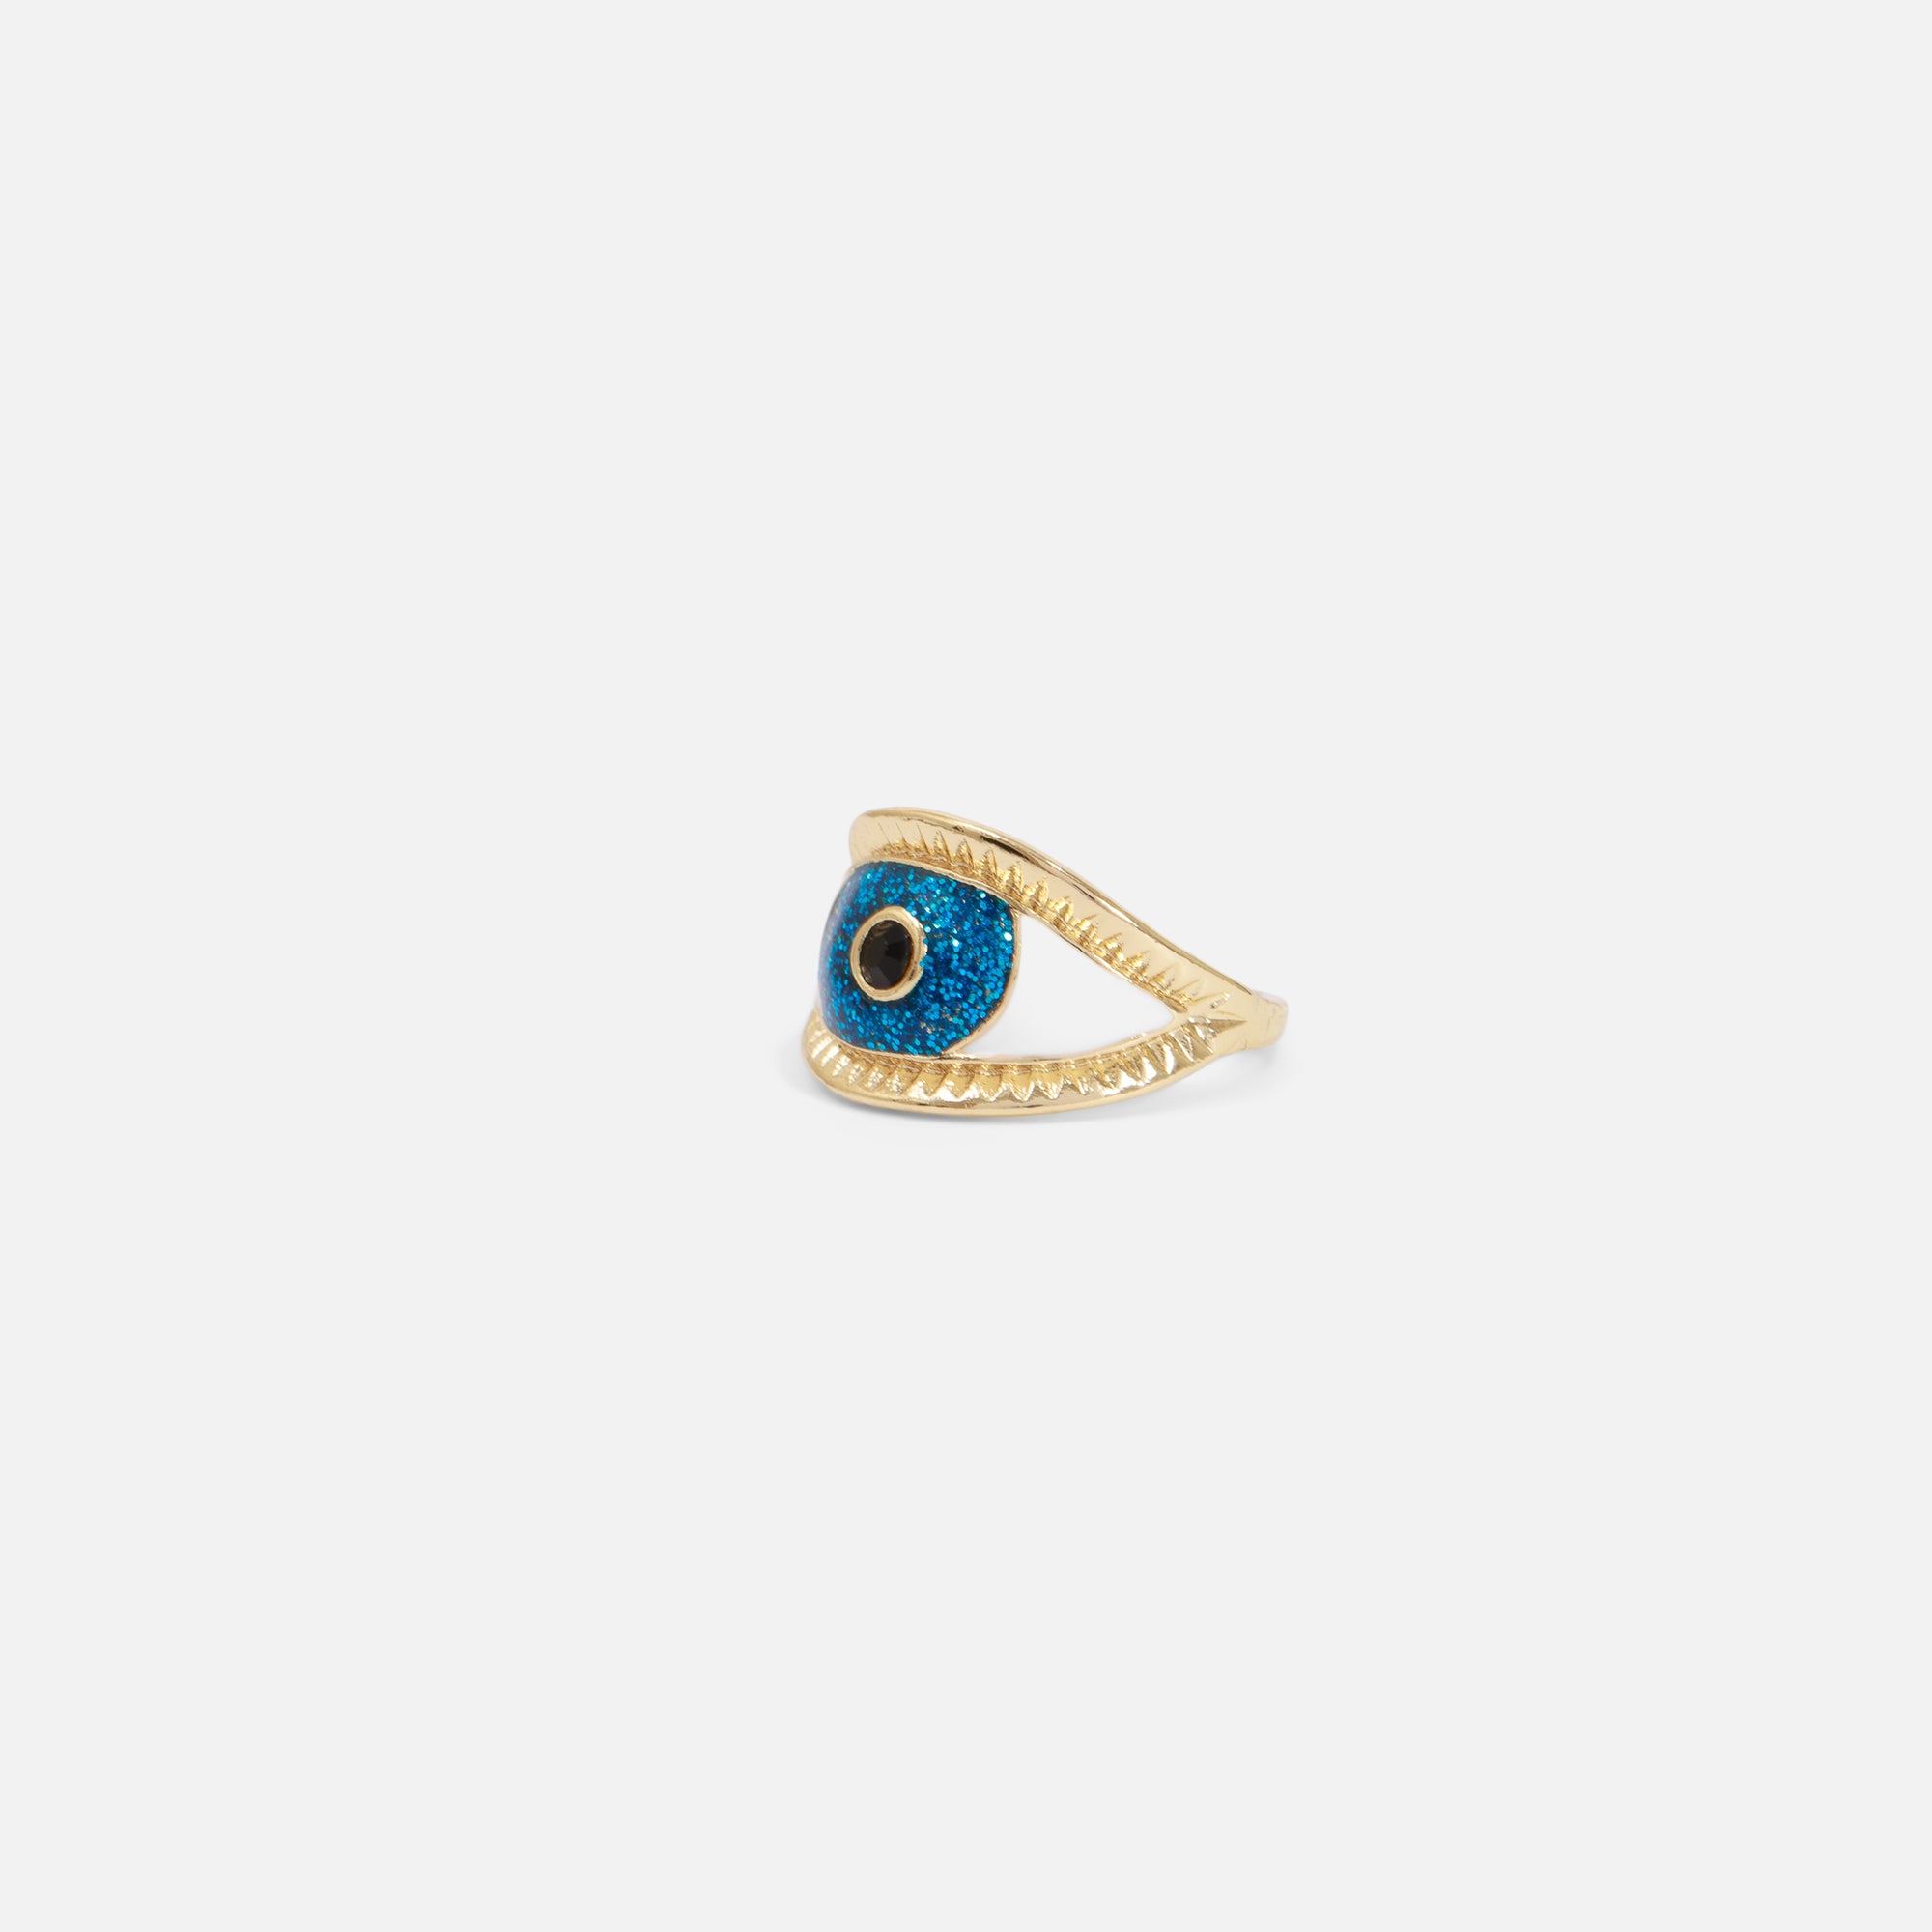 Golden ring with eye